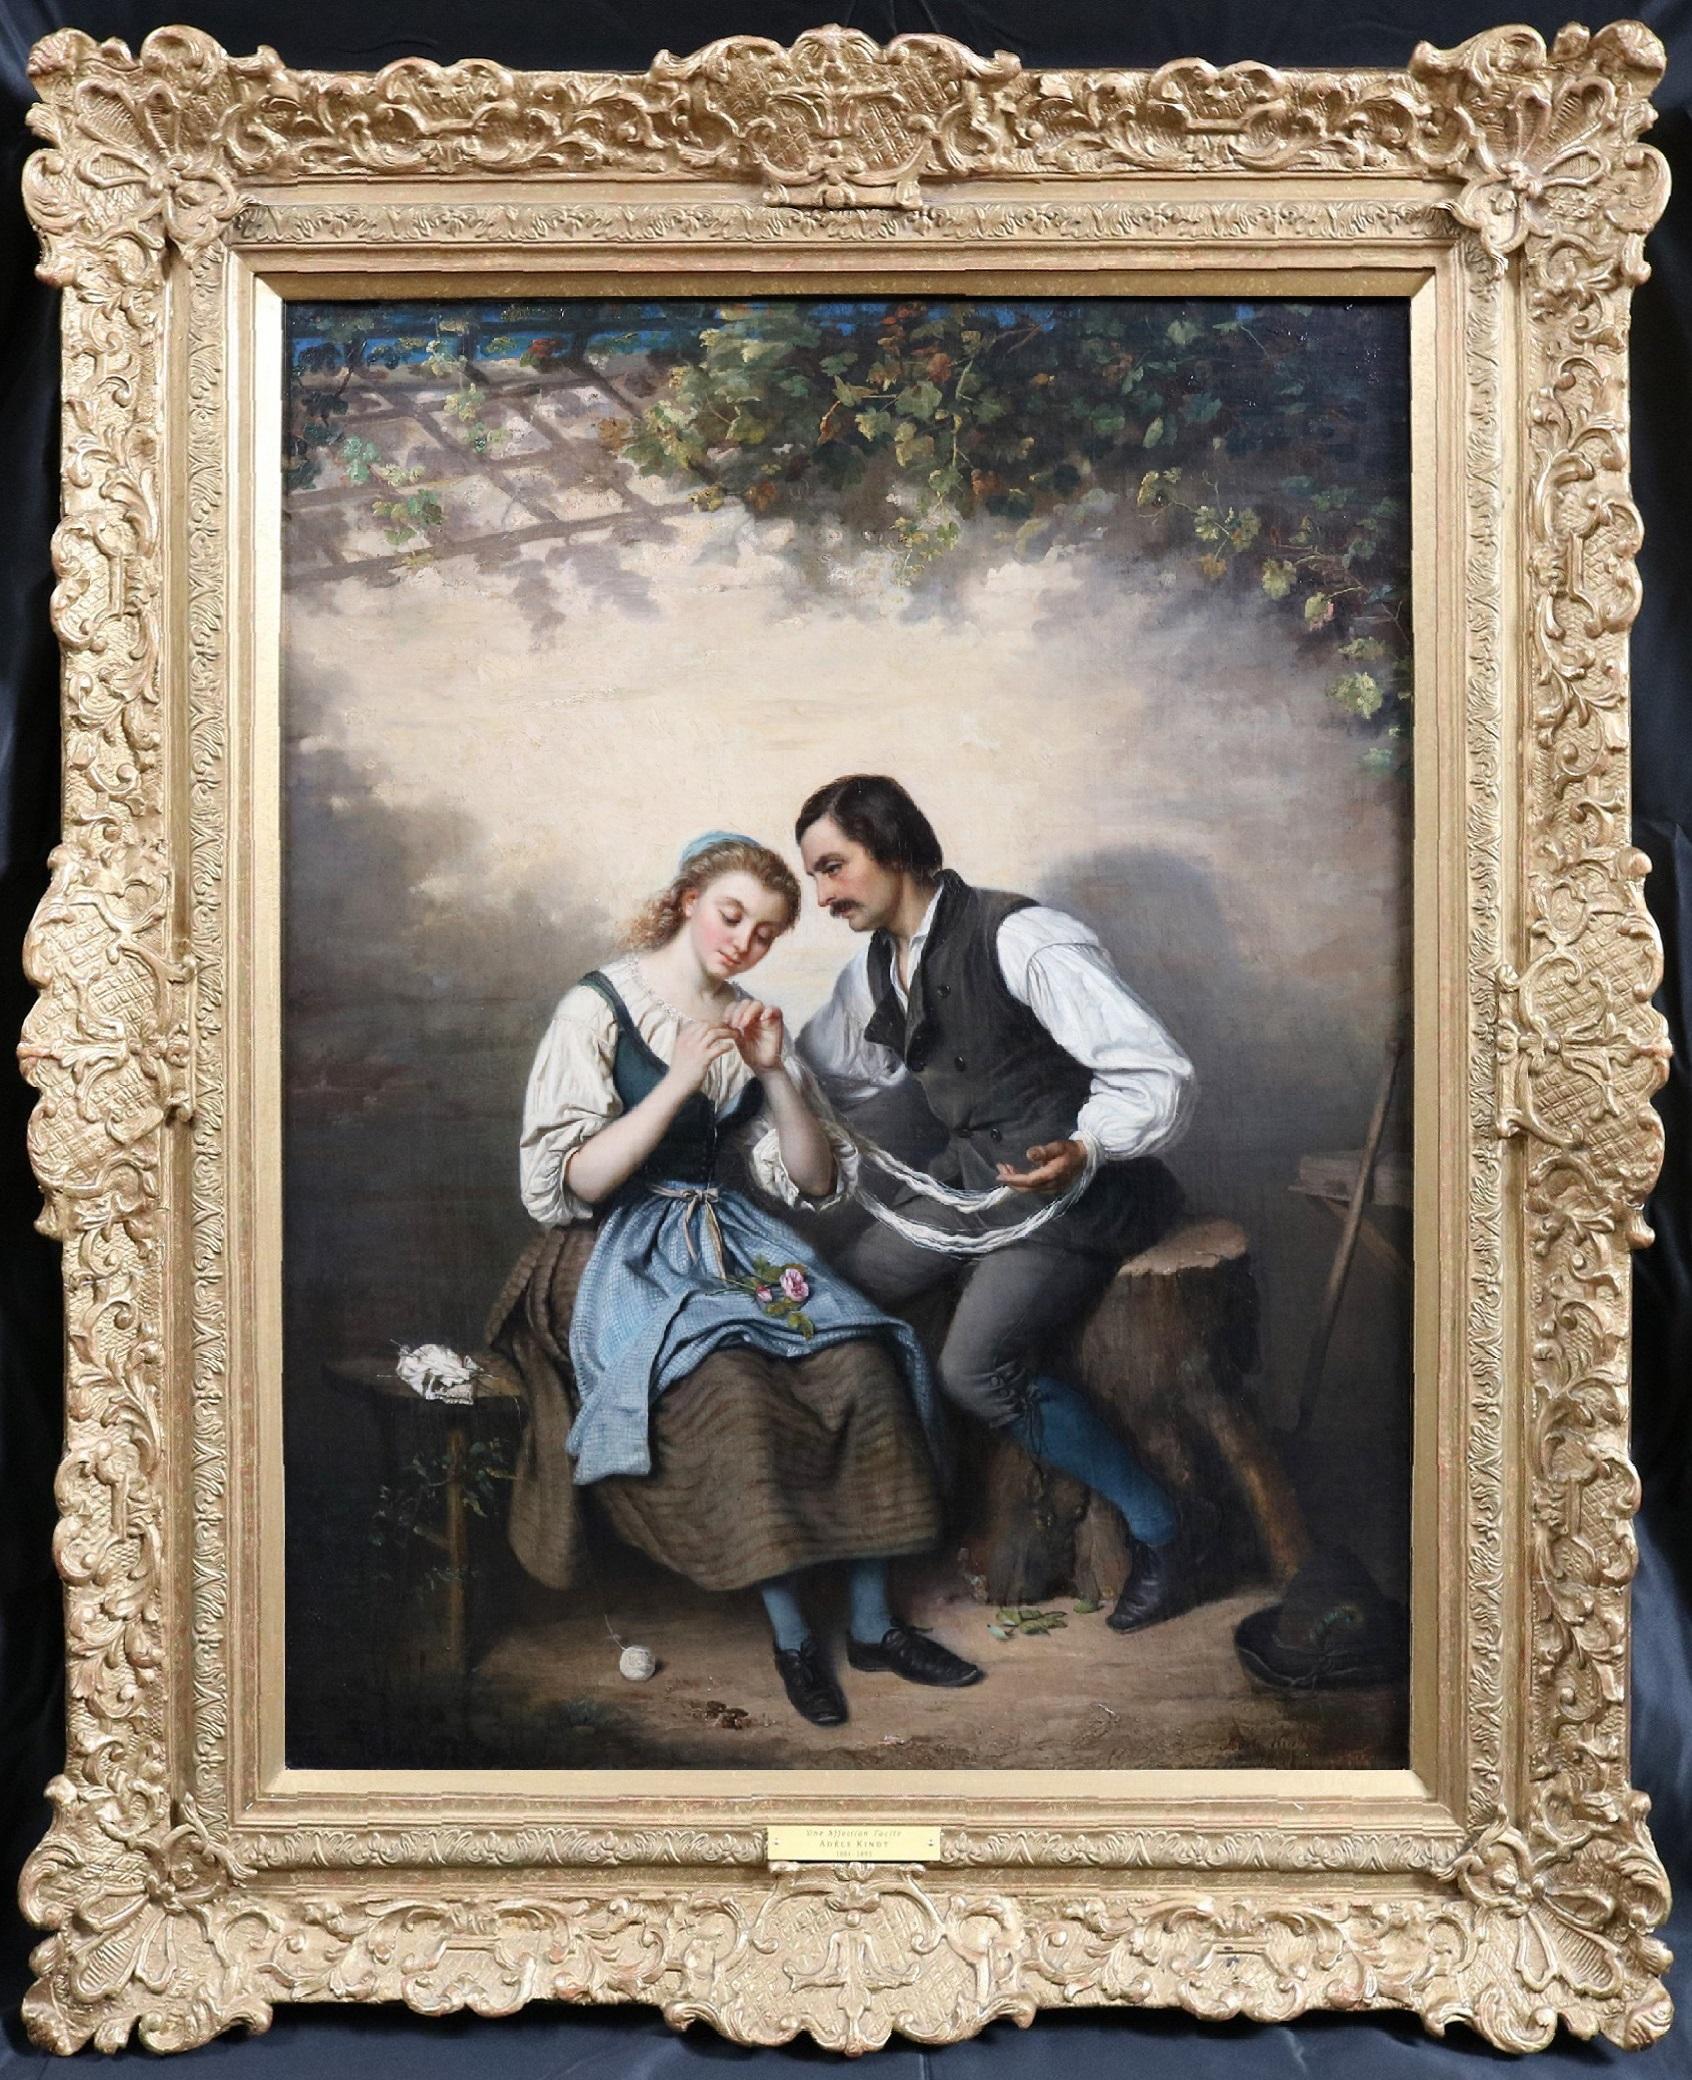 ‘Une Affection Tacite’ by Adèle Kindt (1804-1893). 

The painting – which depicts a young woman and her ardent admirer – is signed by the artist and dated 1862.

Born into a family of artists, Marie-Adélaïde Kindt was a pupil of the great French